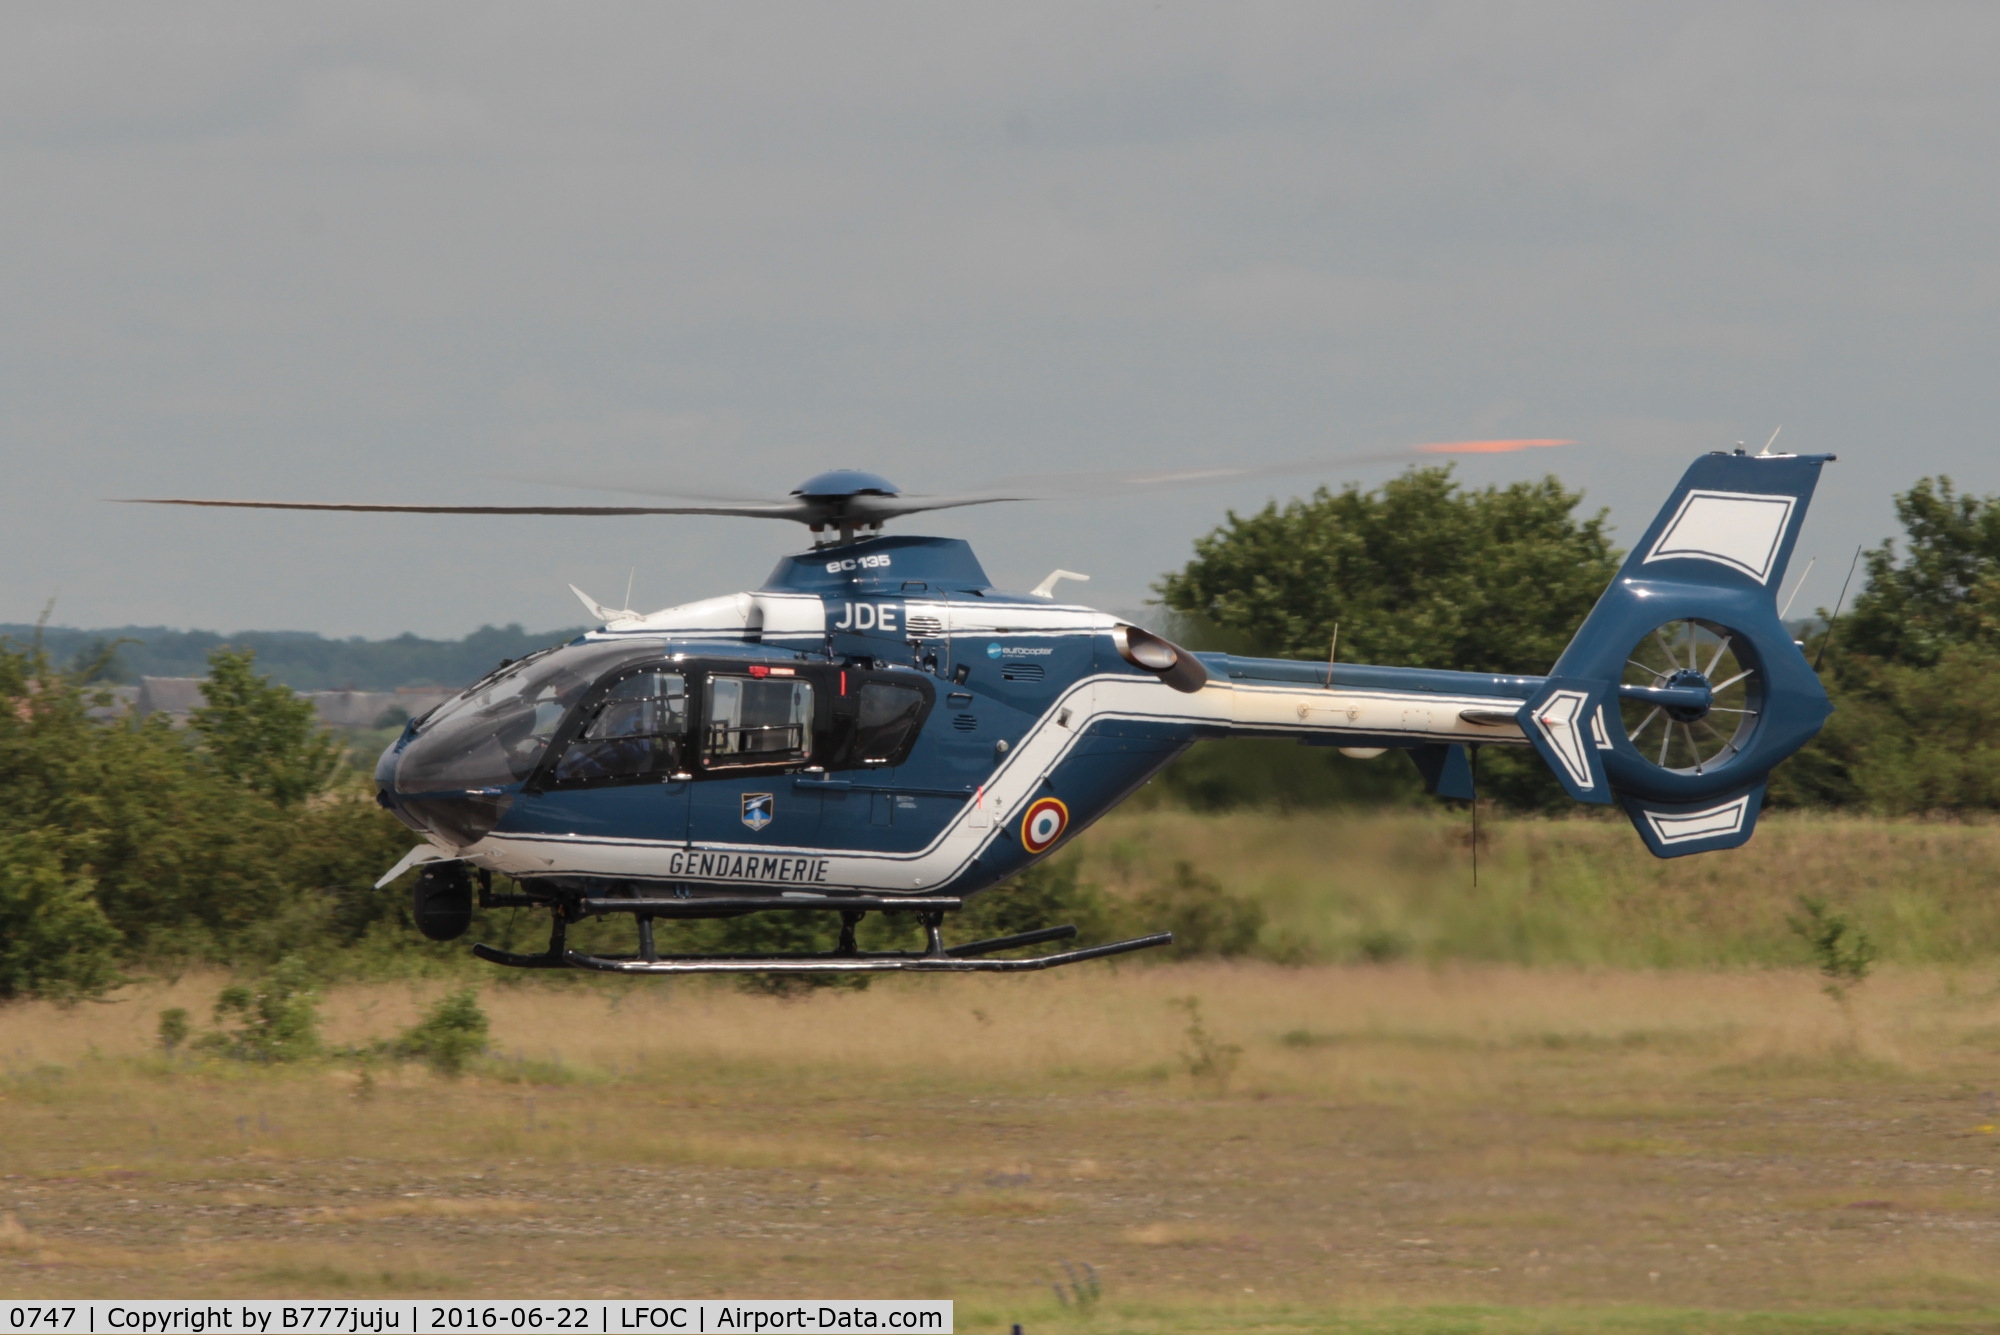 0747, 2009 Eurocopter EC-135T-2 C/N 0747, at Chateaudun